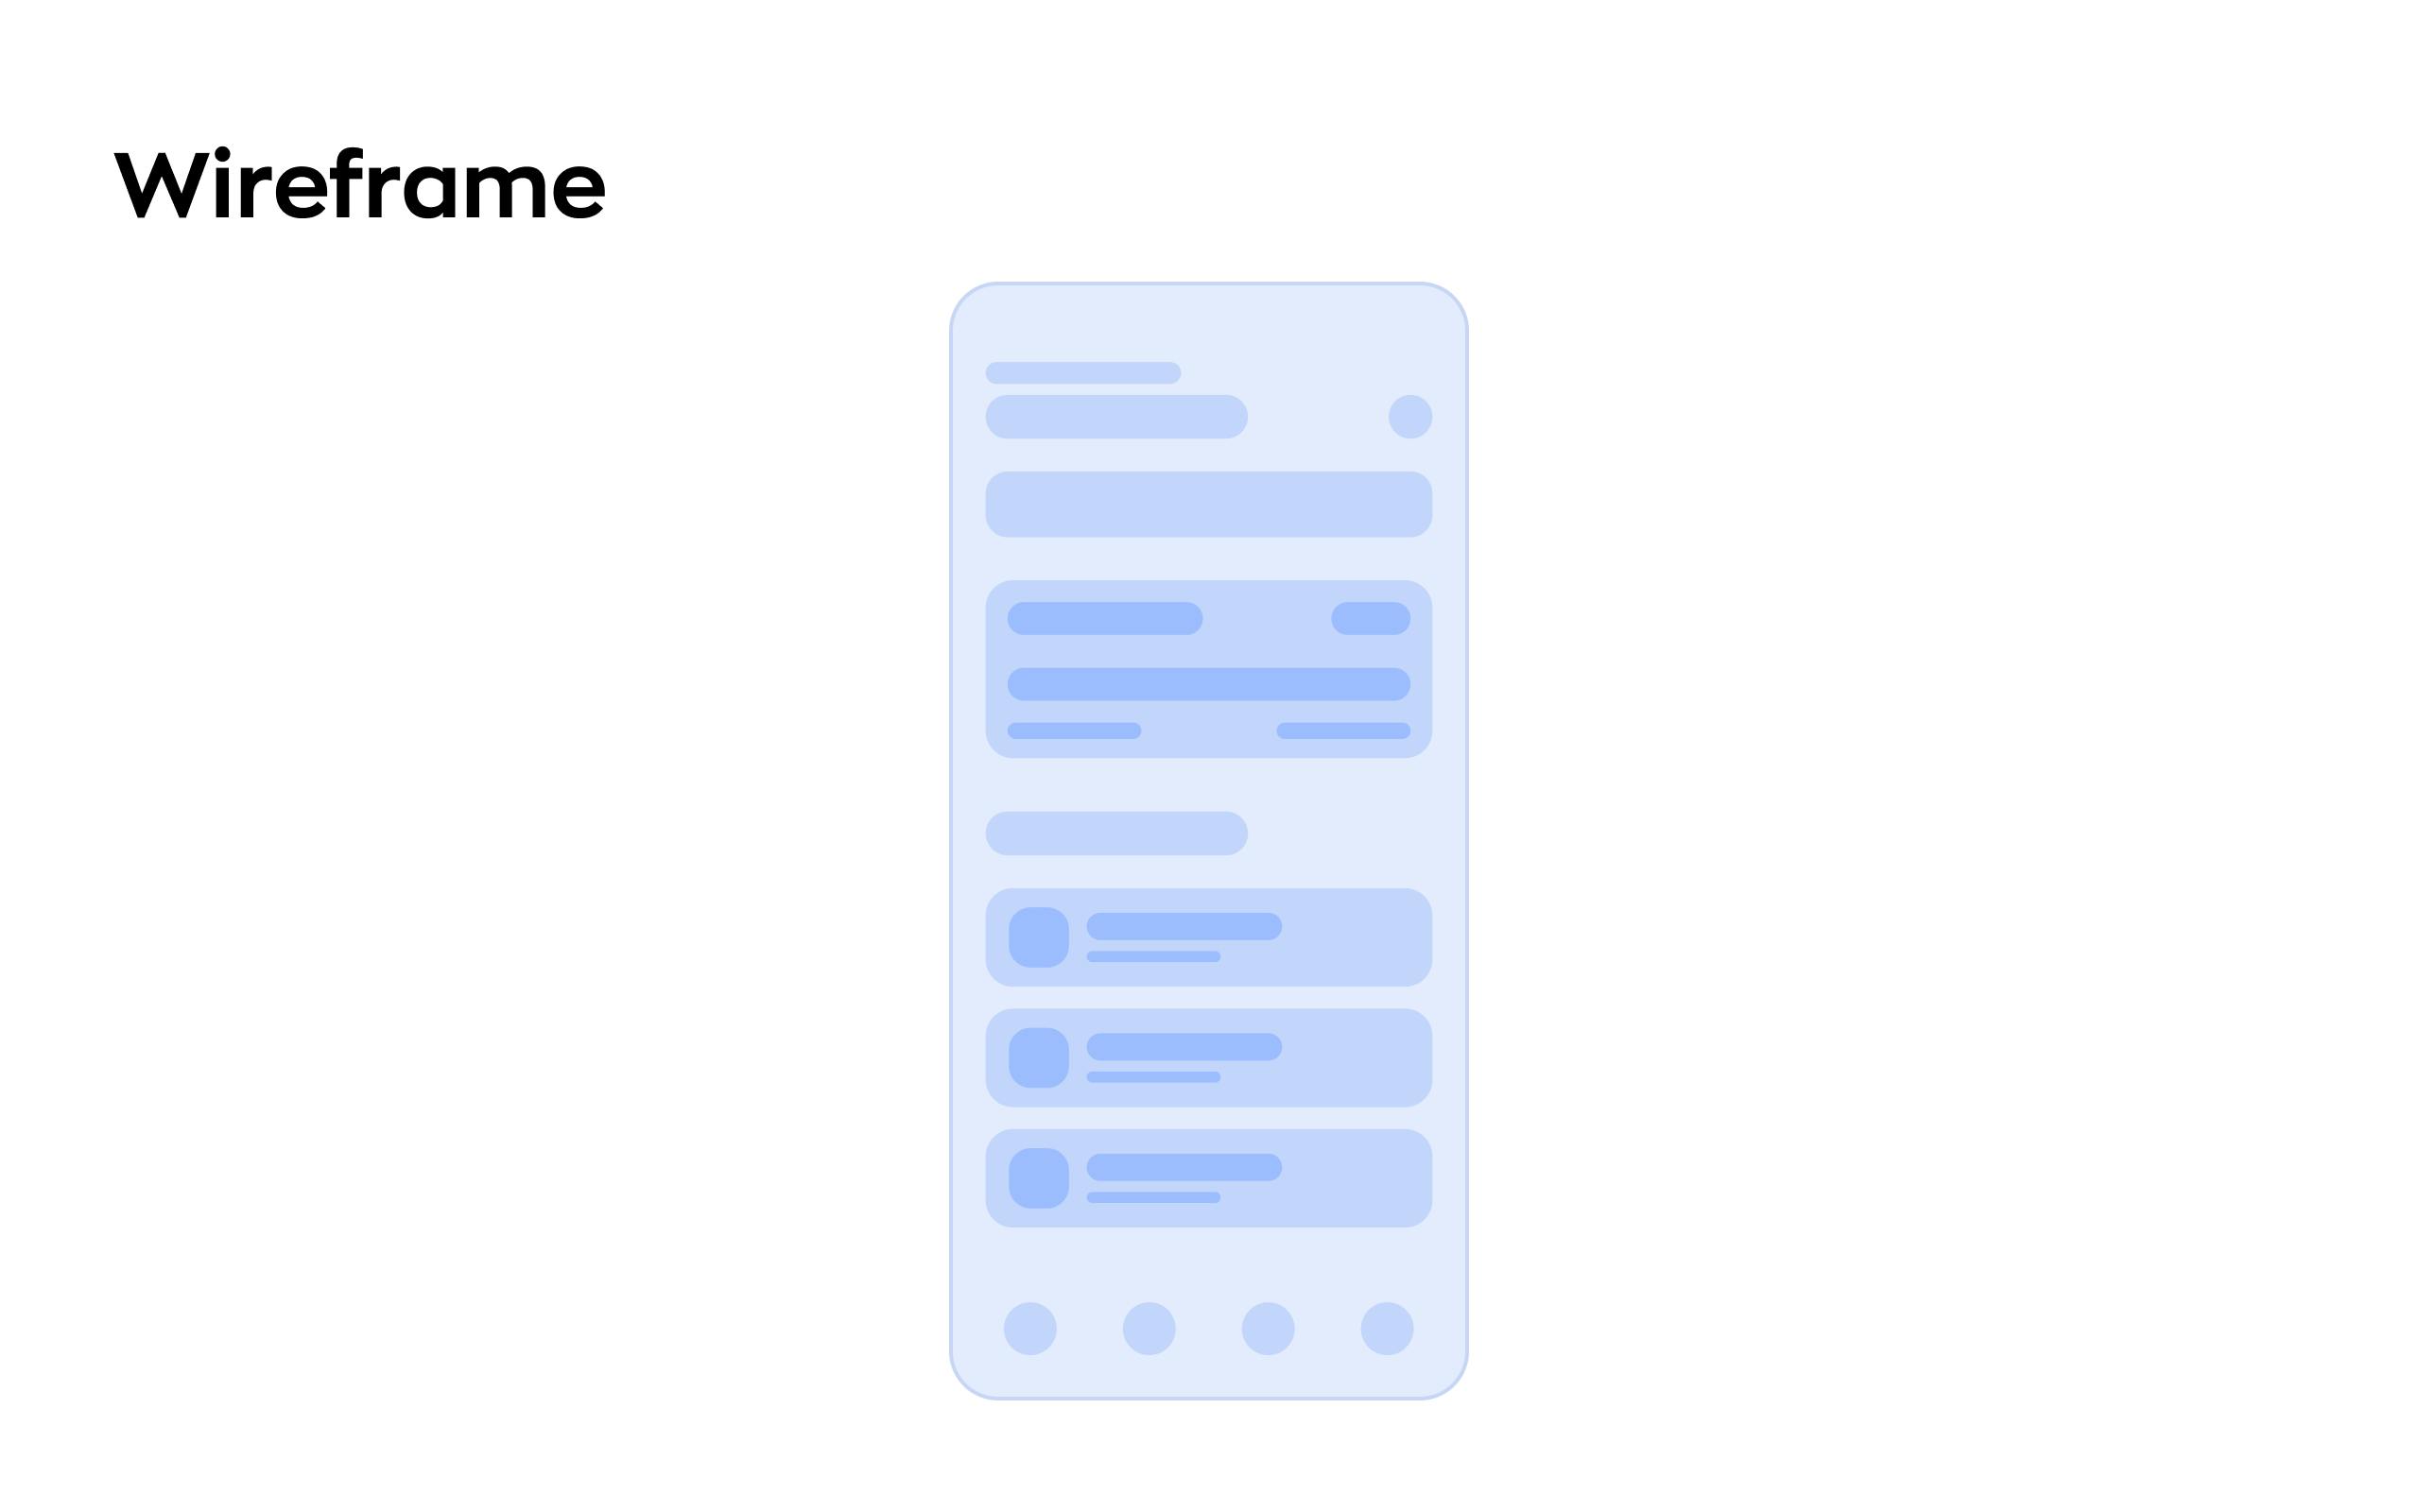 discovery phase in software development: wireframe